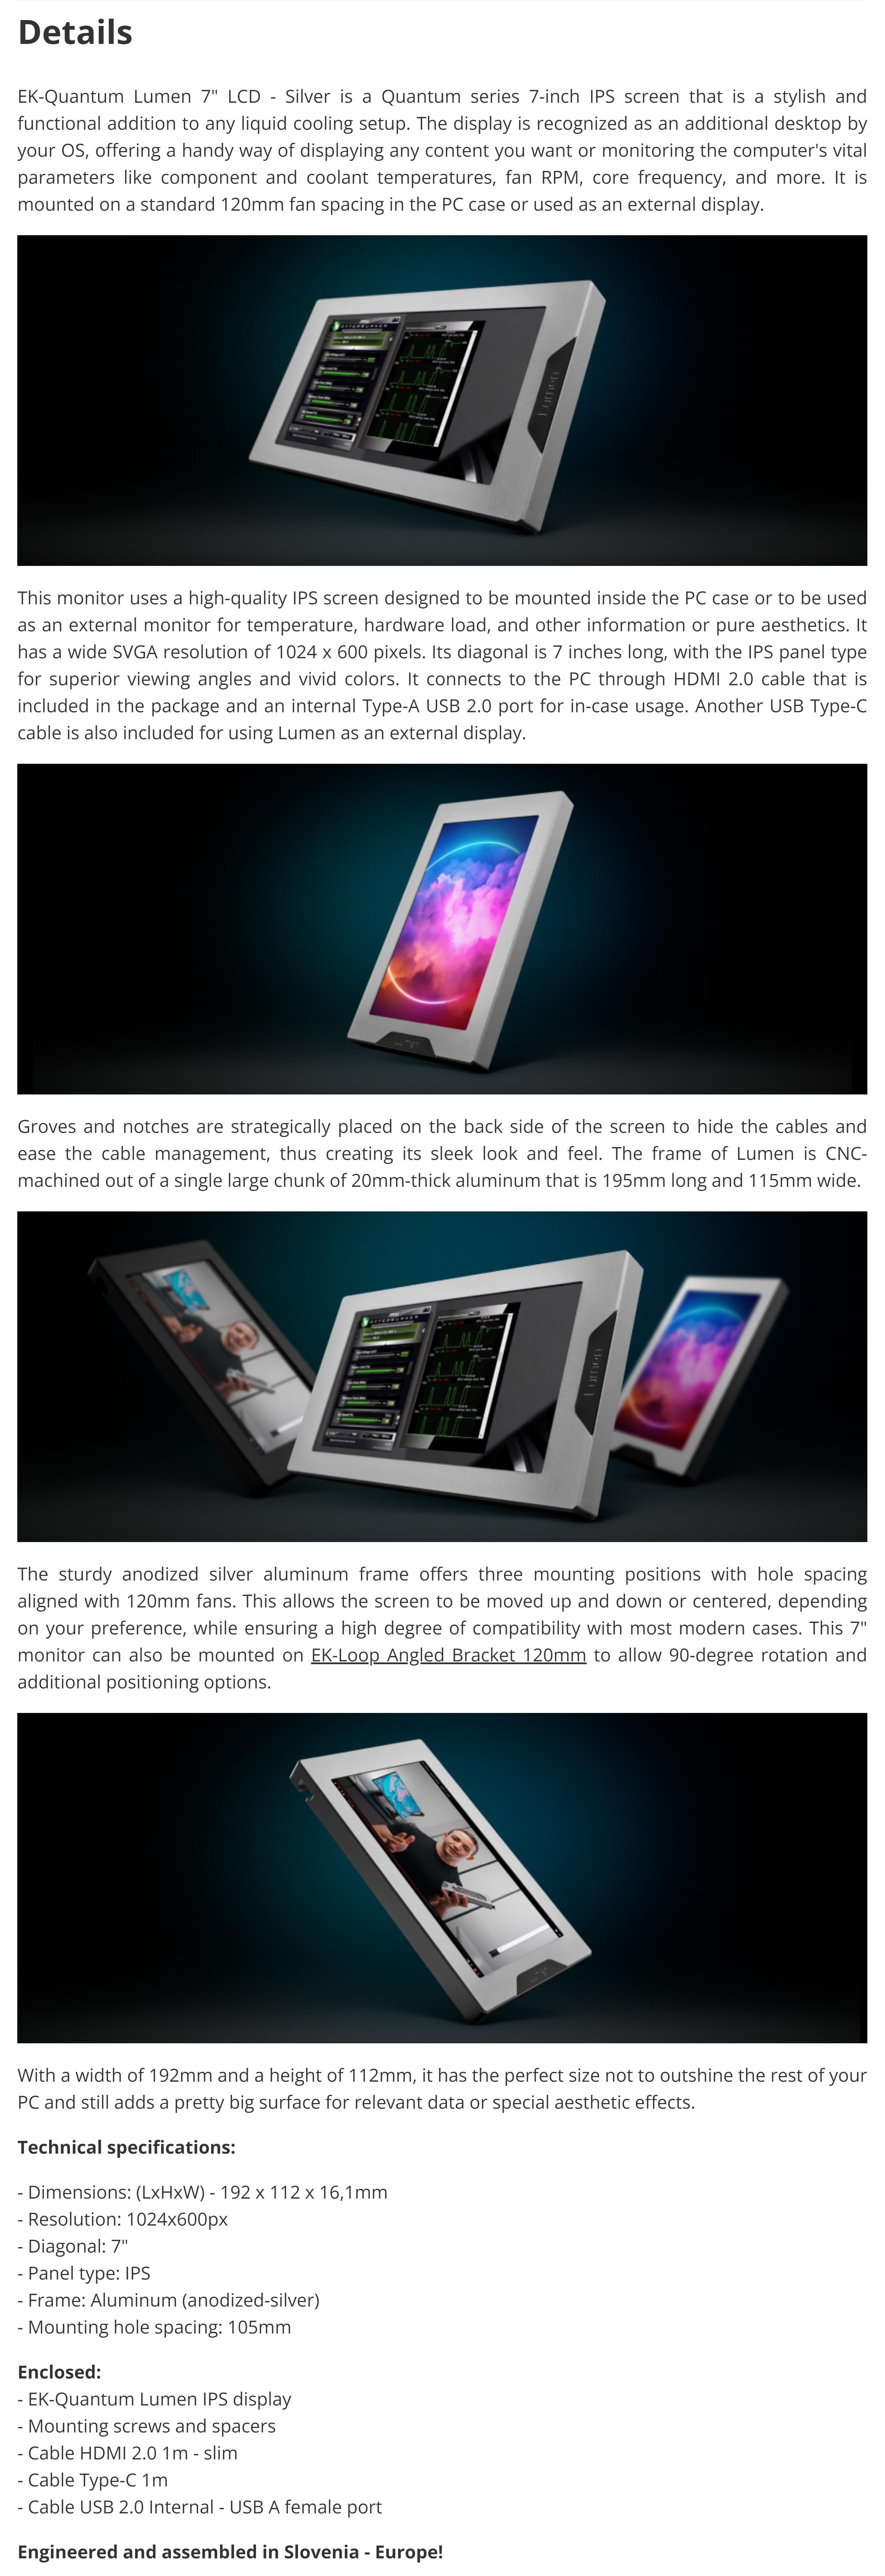 A large marketing image providing additional information about the product EK-Quantum Lumen 7˝ LCD - Silver - Additional alt info not provided